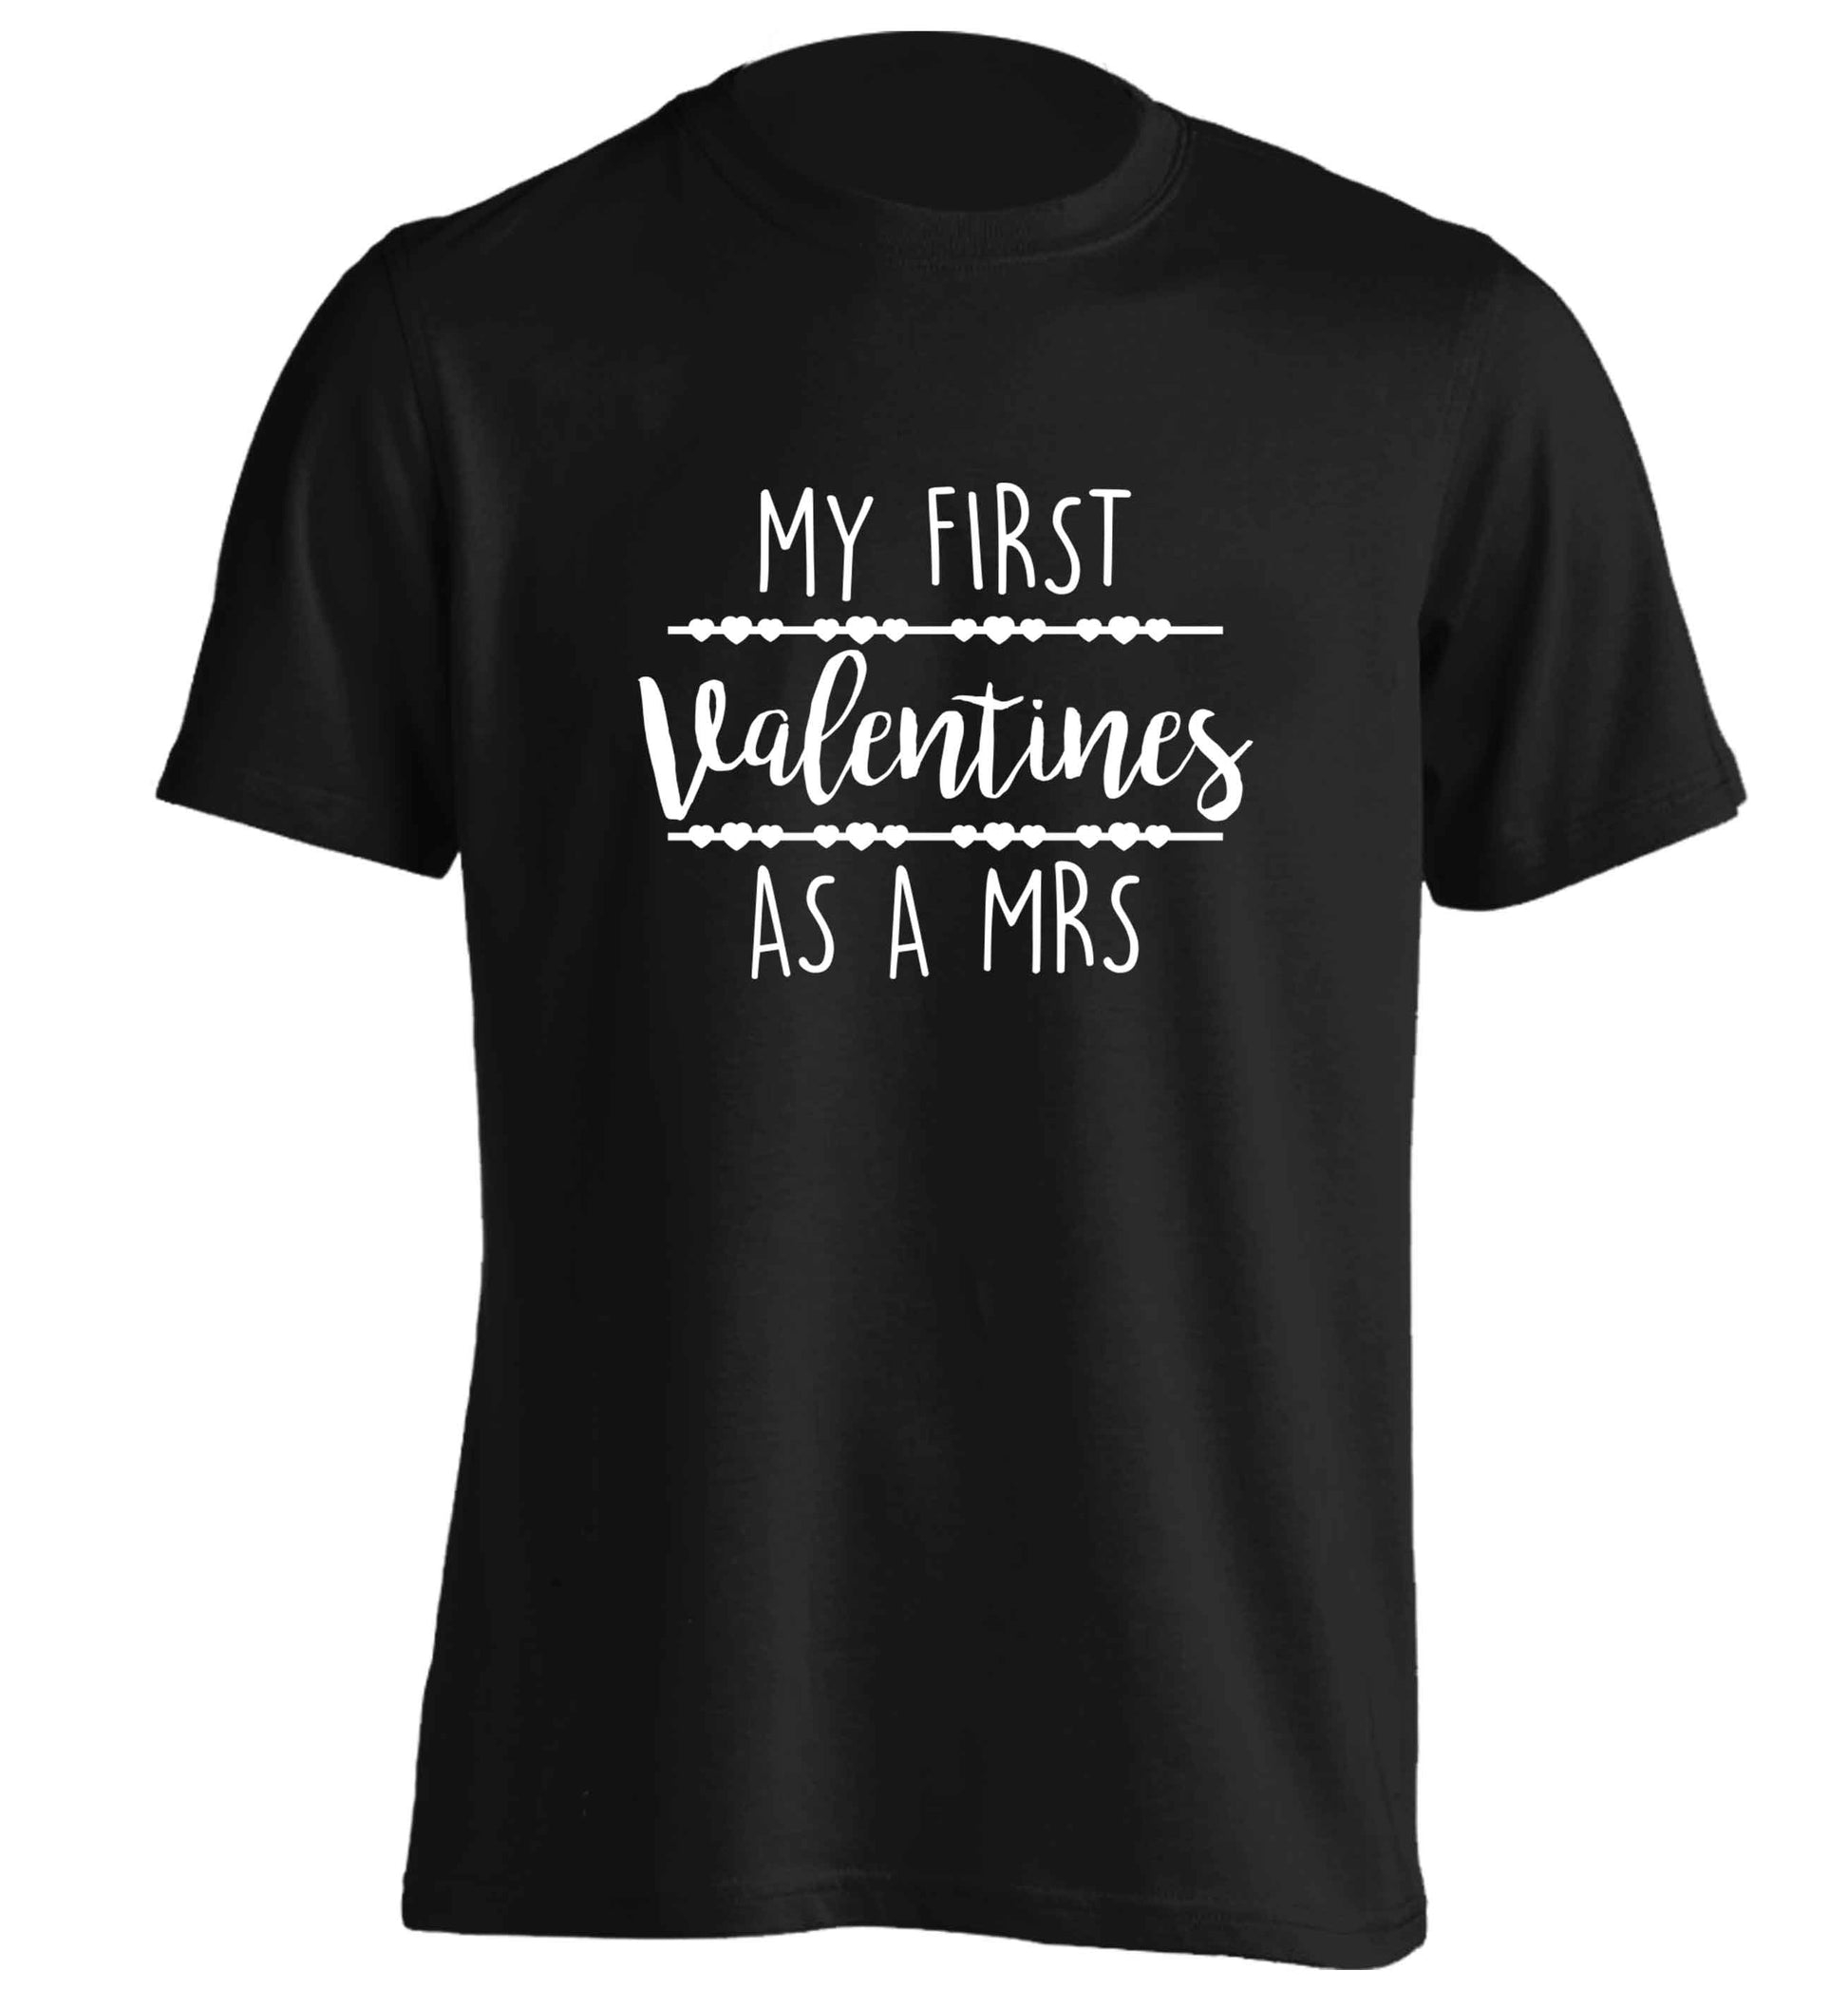 My first valentines as a Mrs adults unisex black Tshirt 2XL